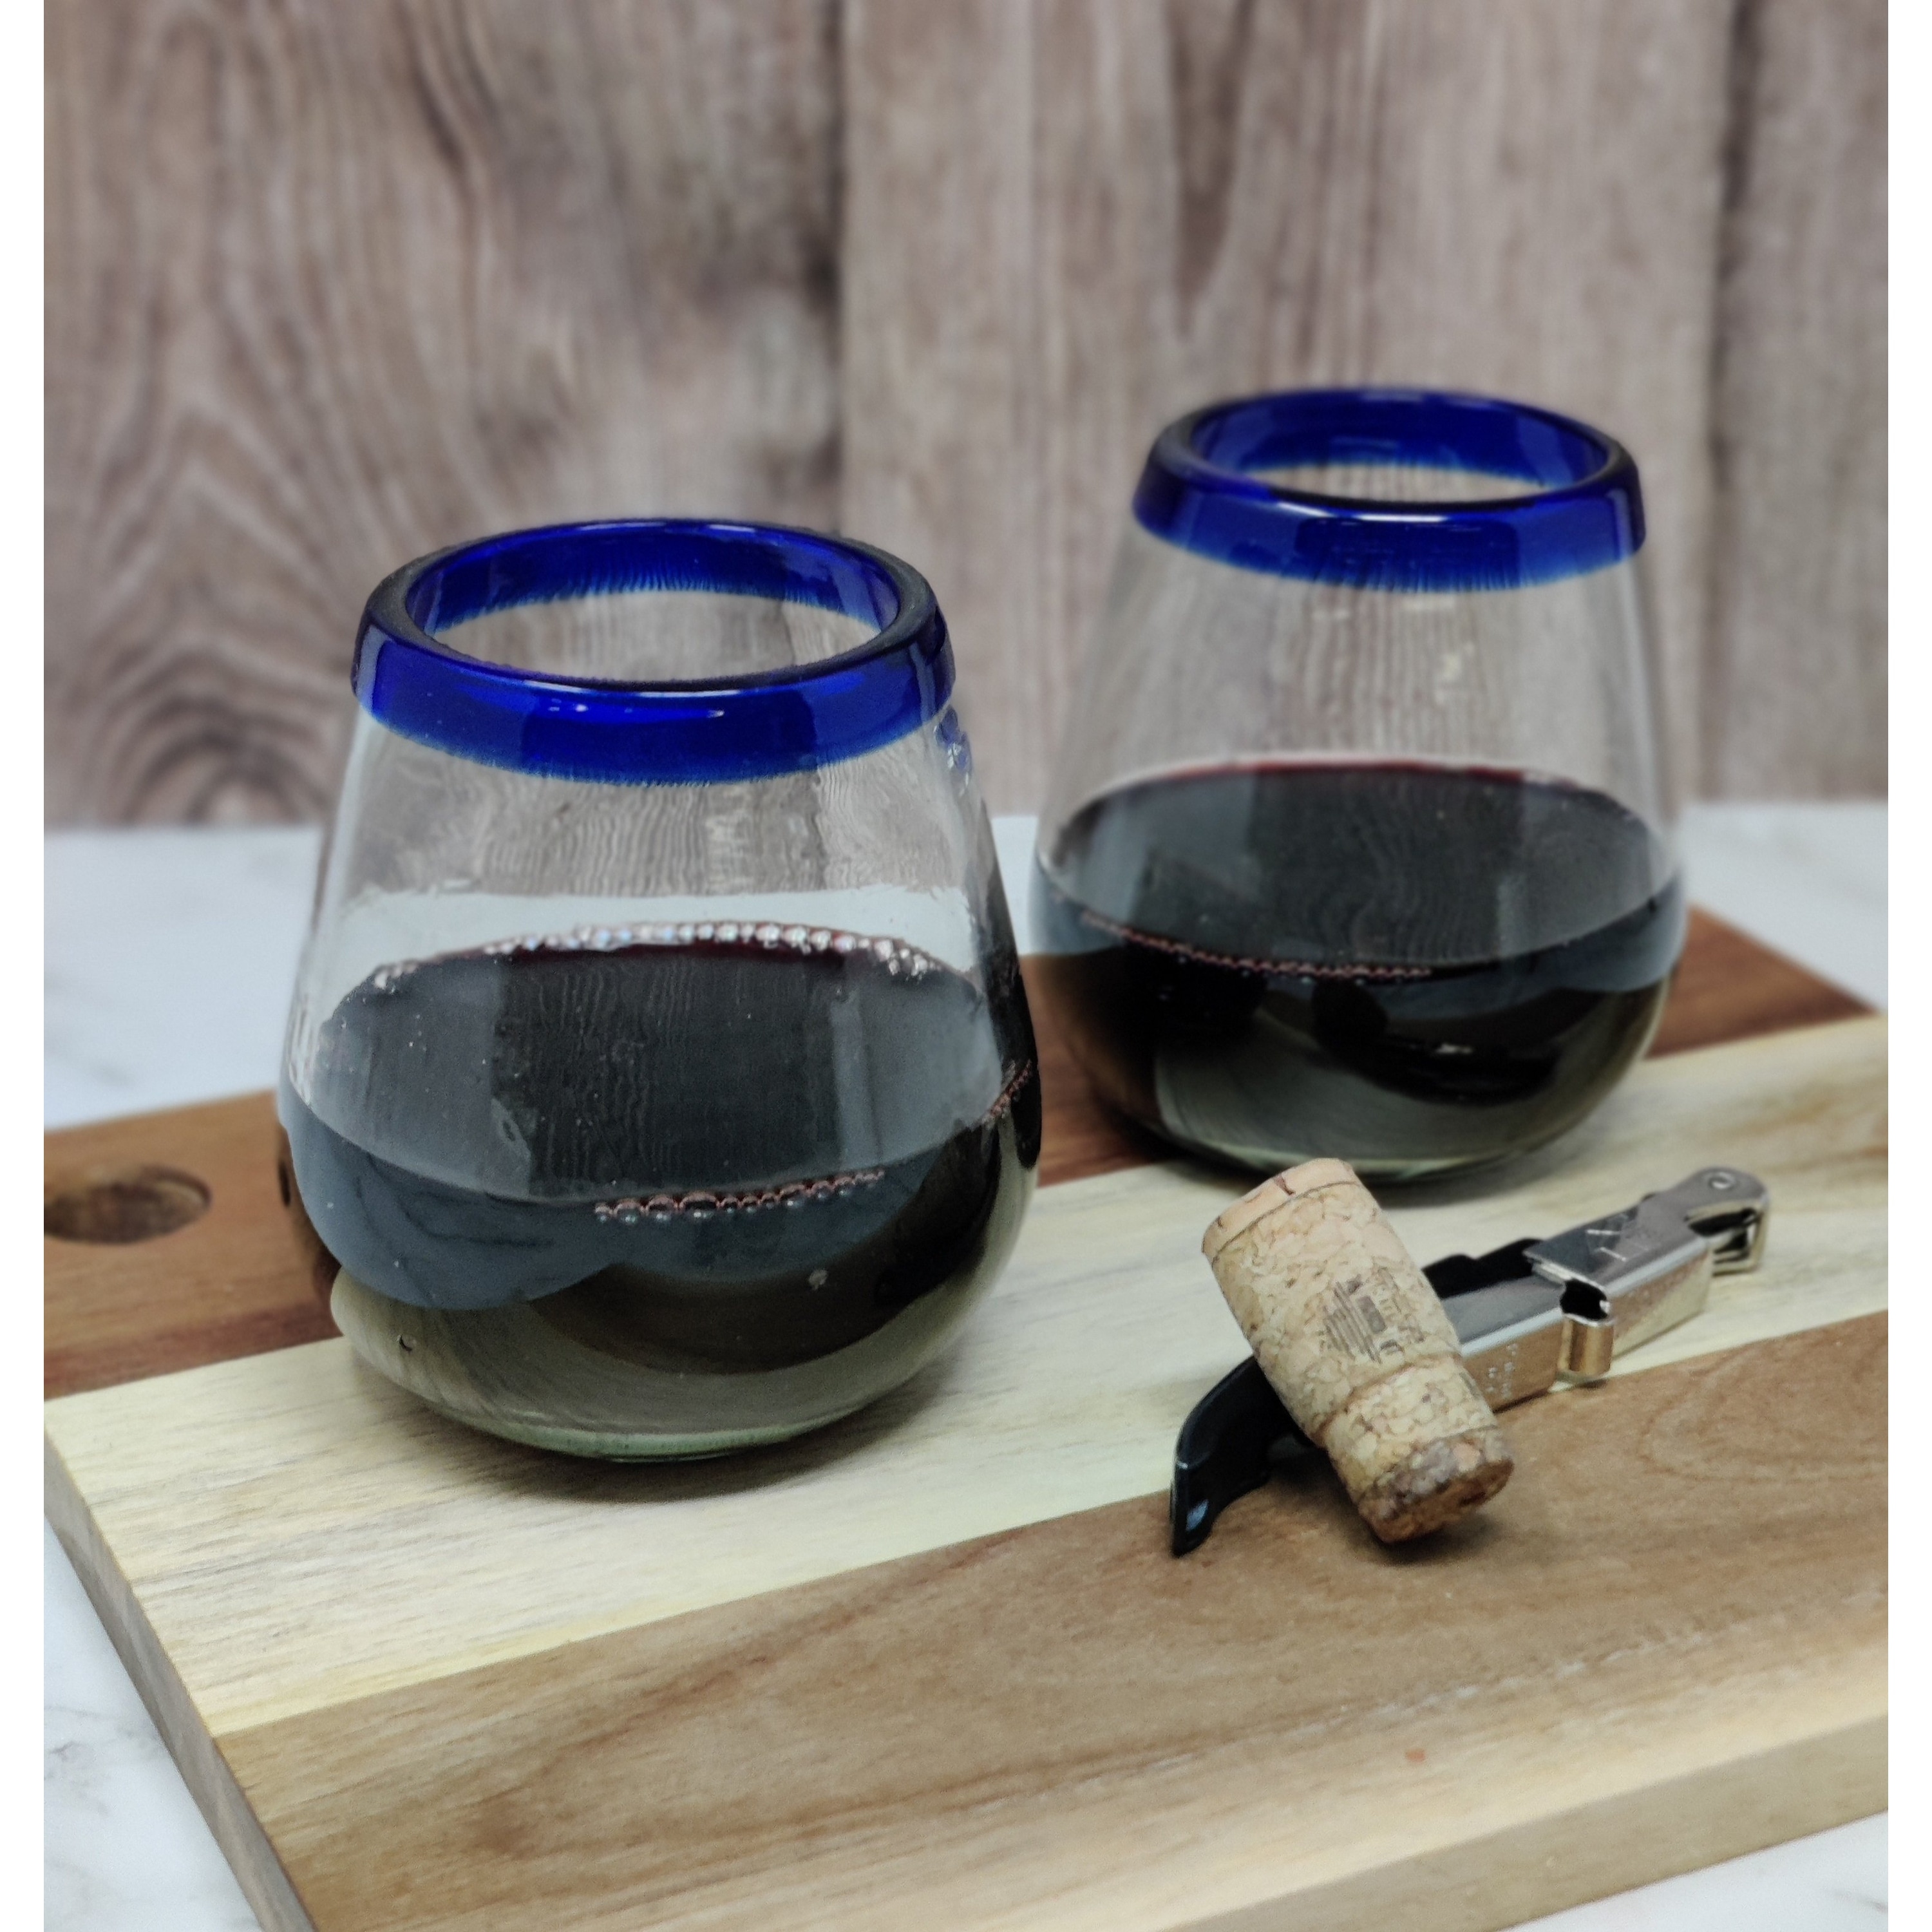 https://ak1.ostkcdn.com/images/products/is/images/direct/68b97fa6d61ce3459b75a44eb33978dc0aefce31/Hand-Blown-Mexican-Stemless-Wine-Glasses---Set-of-6-Glasses-with-Cobalt-Blue-Rims-%2815-oz%29.jpg